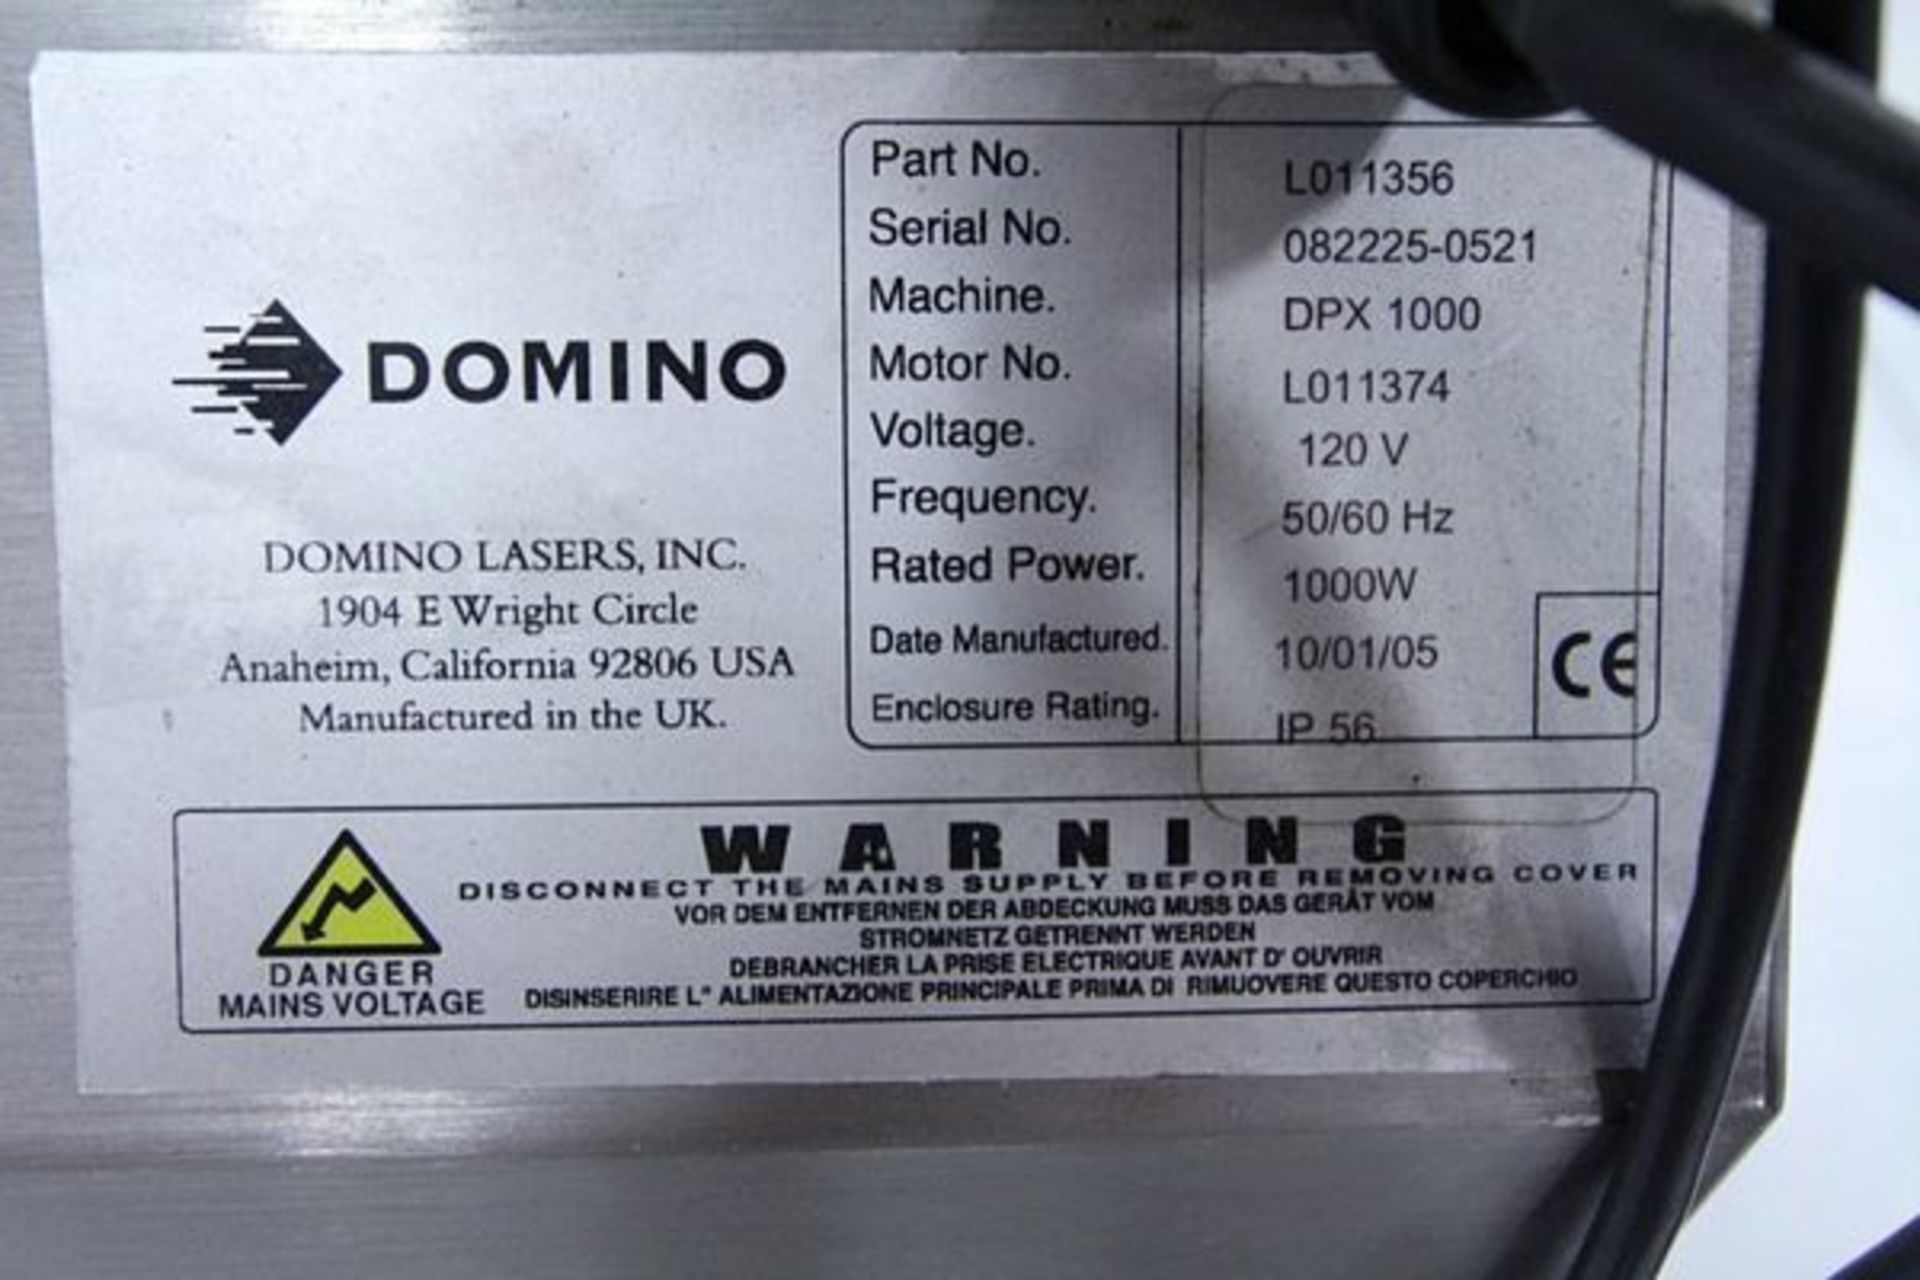 Domino DPX1000 Extraction System for Laser Coder, Year 2005 - Image 3 of 3